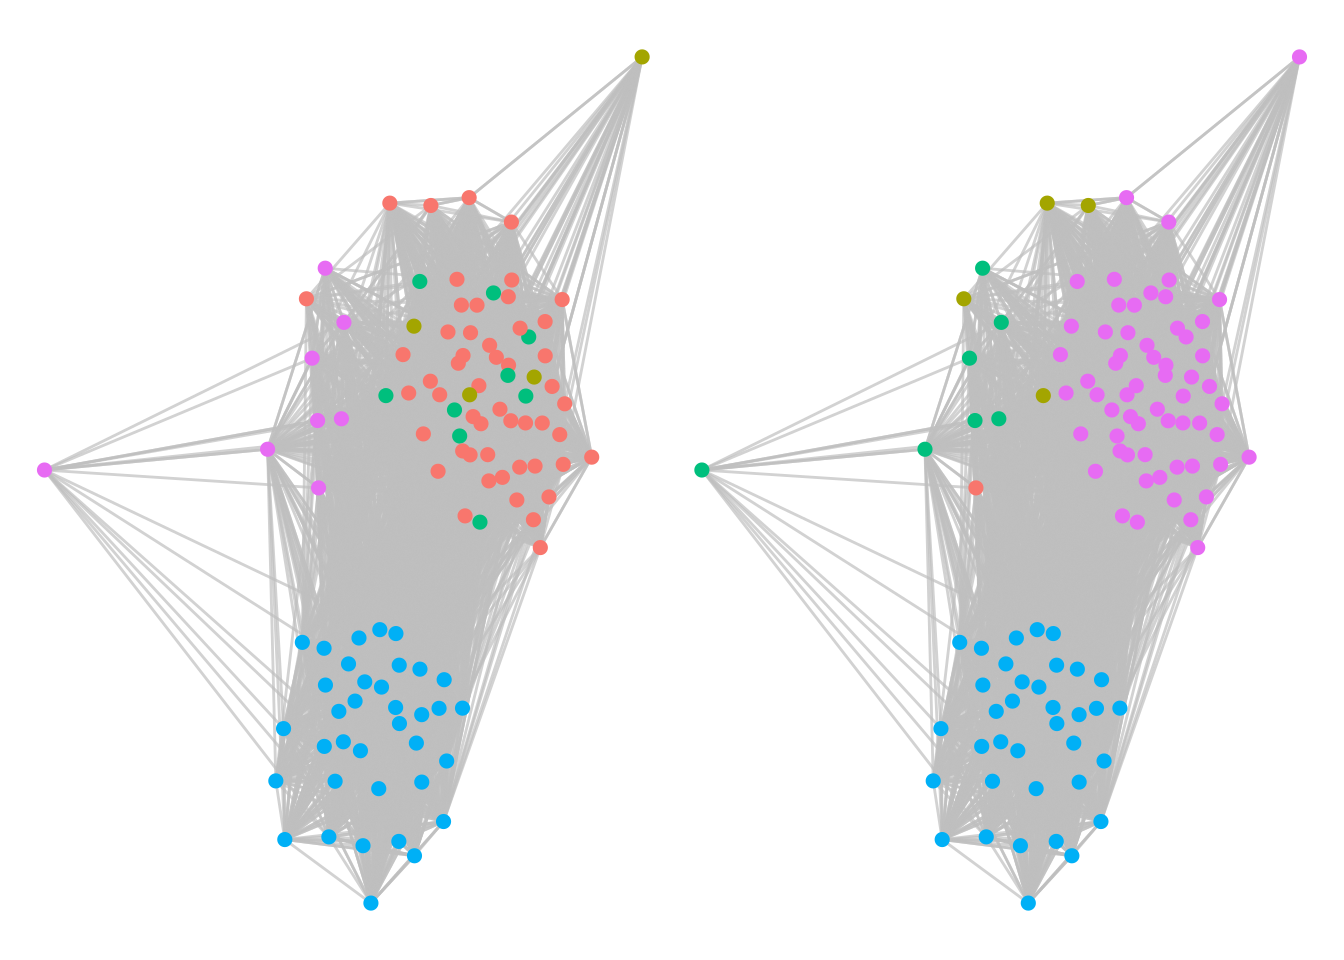 Twitter interaction of Ontario politicians segmented by their Louvain communities (left) and their ground truth political parties (right).  Louvain does a good job of identifying political alignment.